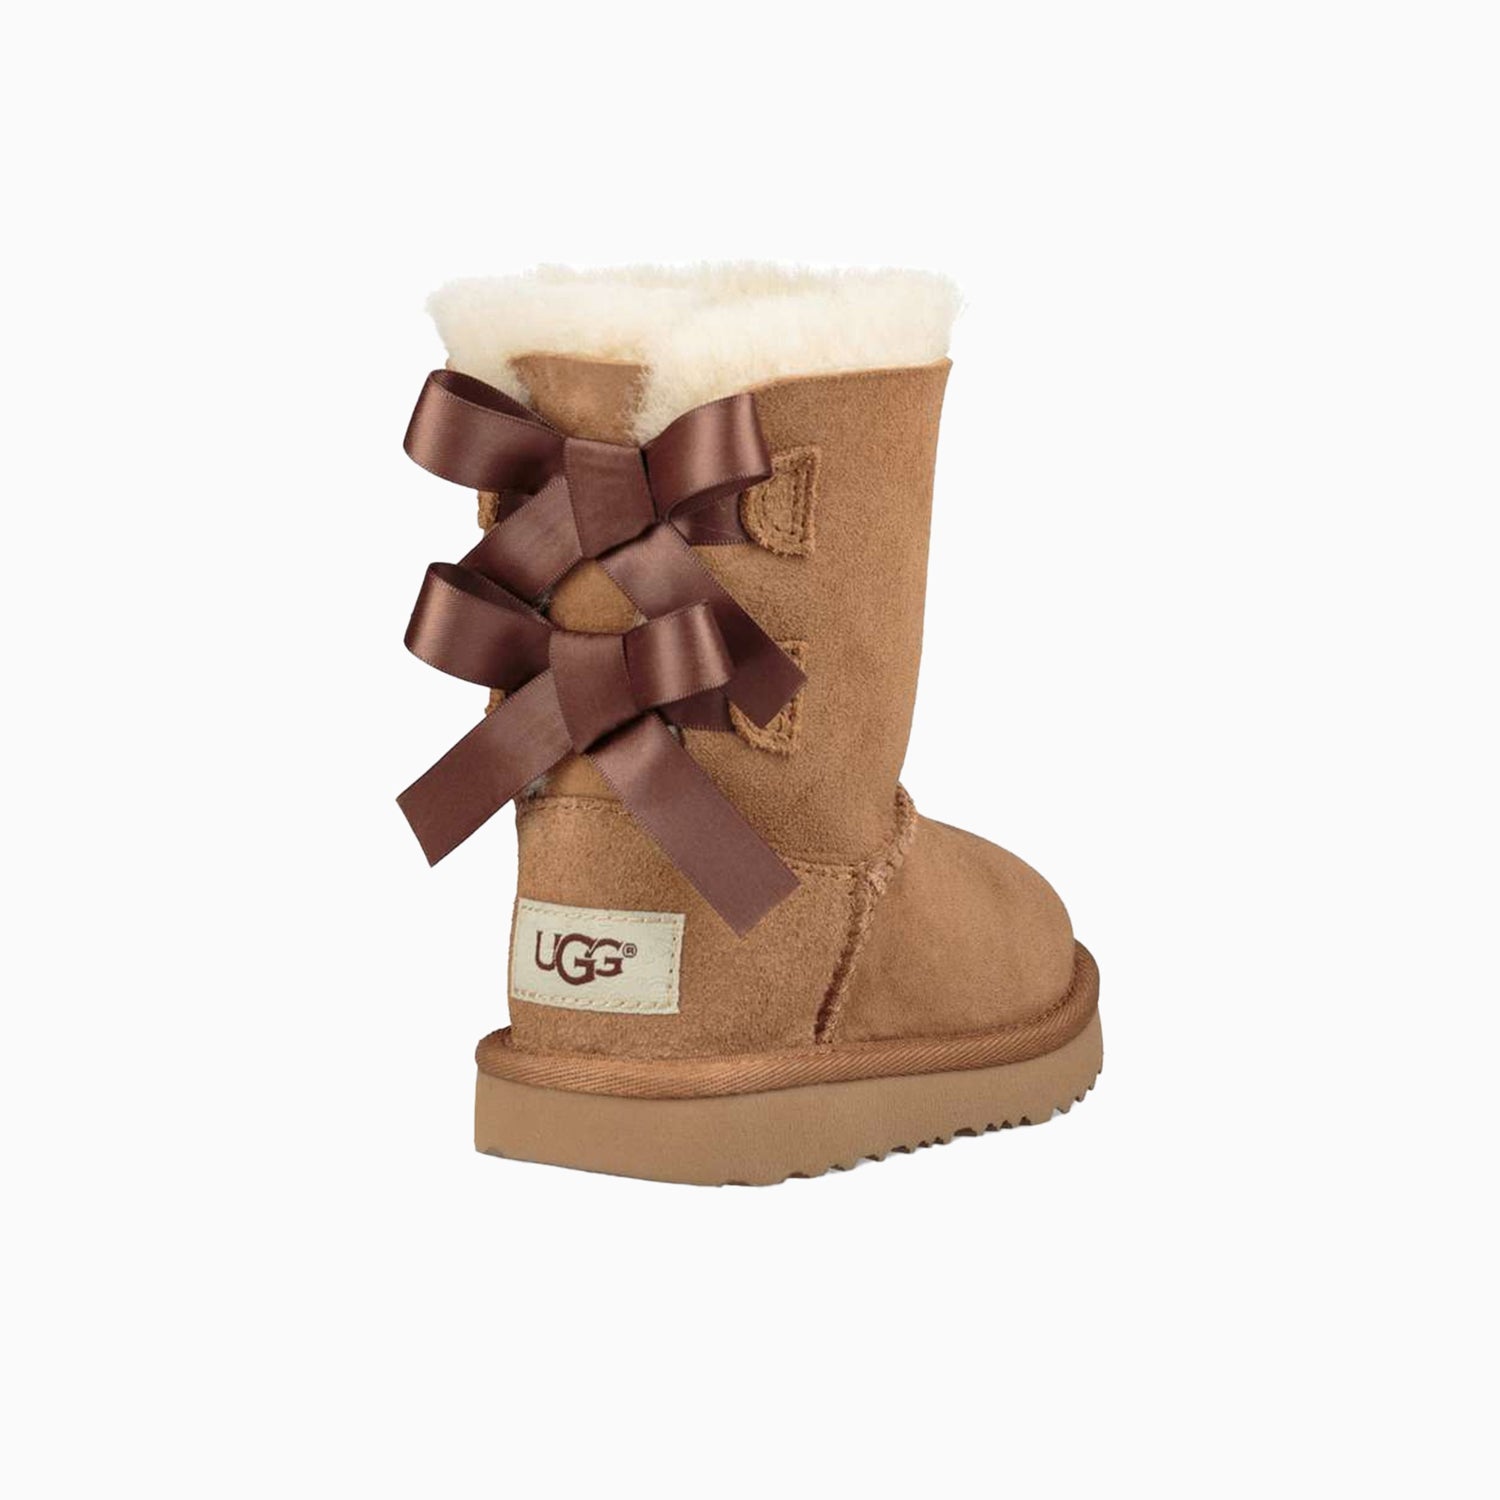 ugg-kids-bailey-bow-ii-toddler-boot-1017394t-che